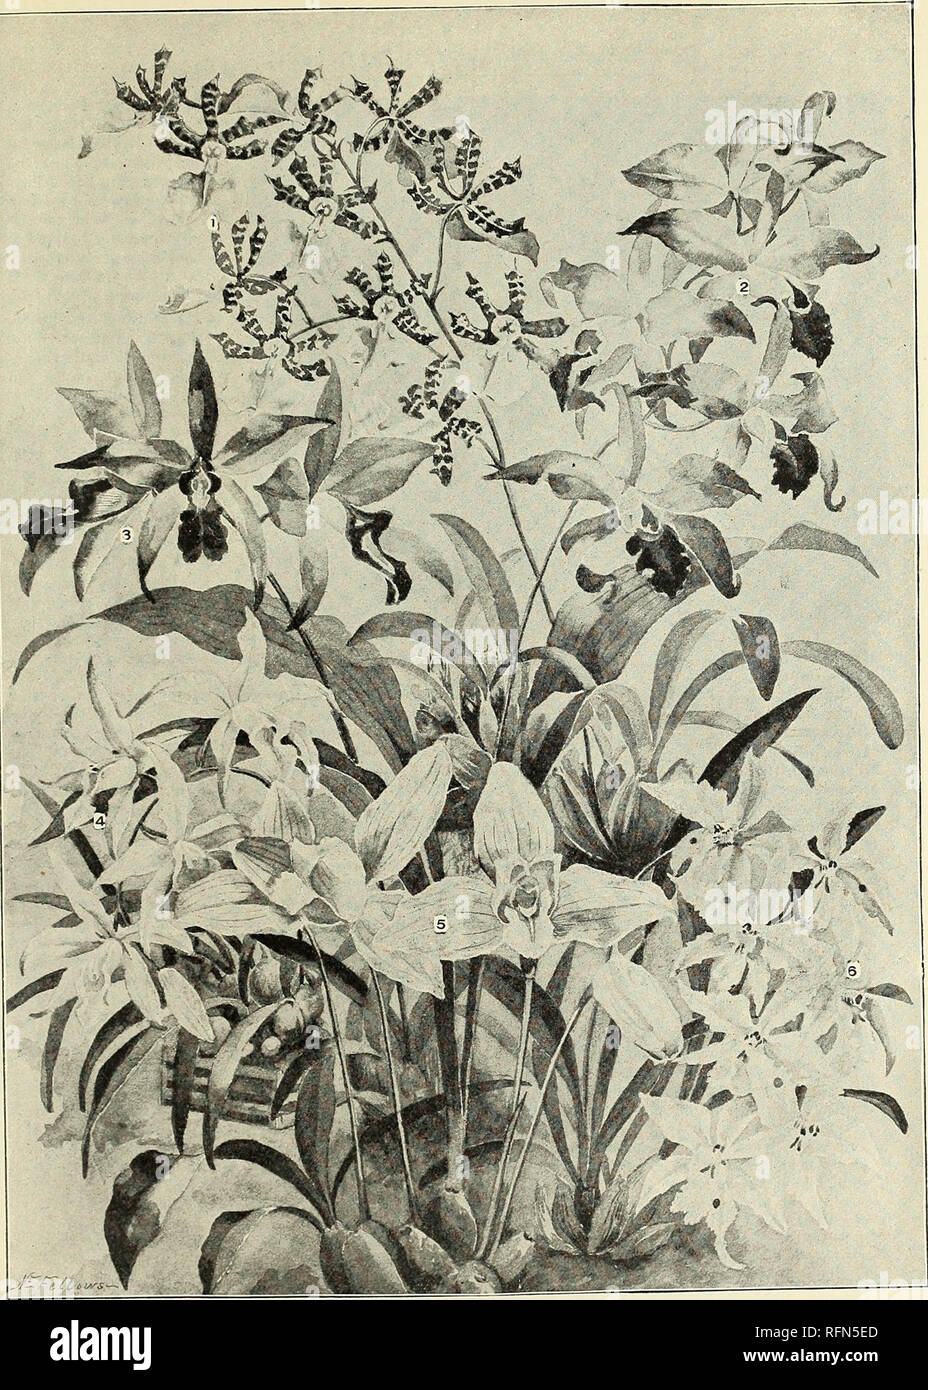 . General illustrated and descriptive catalogue of new, rare and valuable plants. Nurseries (Horticulture) New York (State) New Rochelle Catalogs; Nurseries (Horticulture) Wisconsin Catalogs; Plants, Ornamental Catalogs; Bulbs (Plants) Catalogs; Flowers Catalogs; Trees Seedlings Catalogs; Shrubs Catalogs; Fruit Catalogs. Some of the Most Popular Orchids. (I) Oncidium tigrinum. (Page 48.) (2) Laeia aiitumnalis. (Page 44.) (3) Lielia anceps. (Page 44.) (4) Ccelogynecristata. (Page 39). (5) Lycaste Skinneri. (Page 44.) (6) Odontoglossum crispum. (Page 46.1. Please note that these images are extr Stock Photo